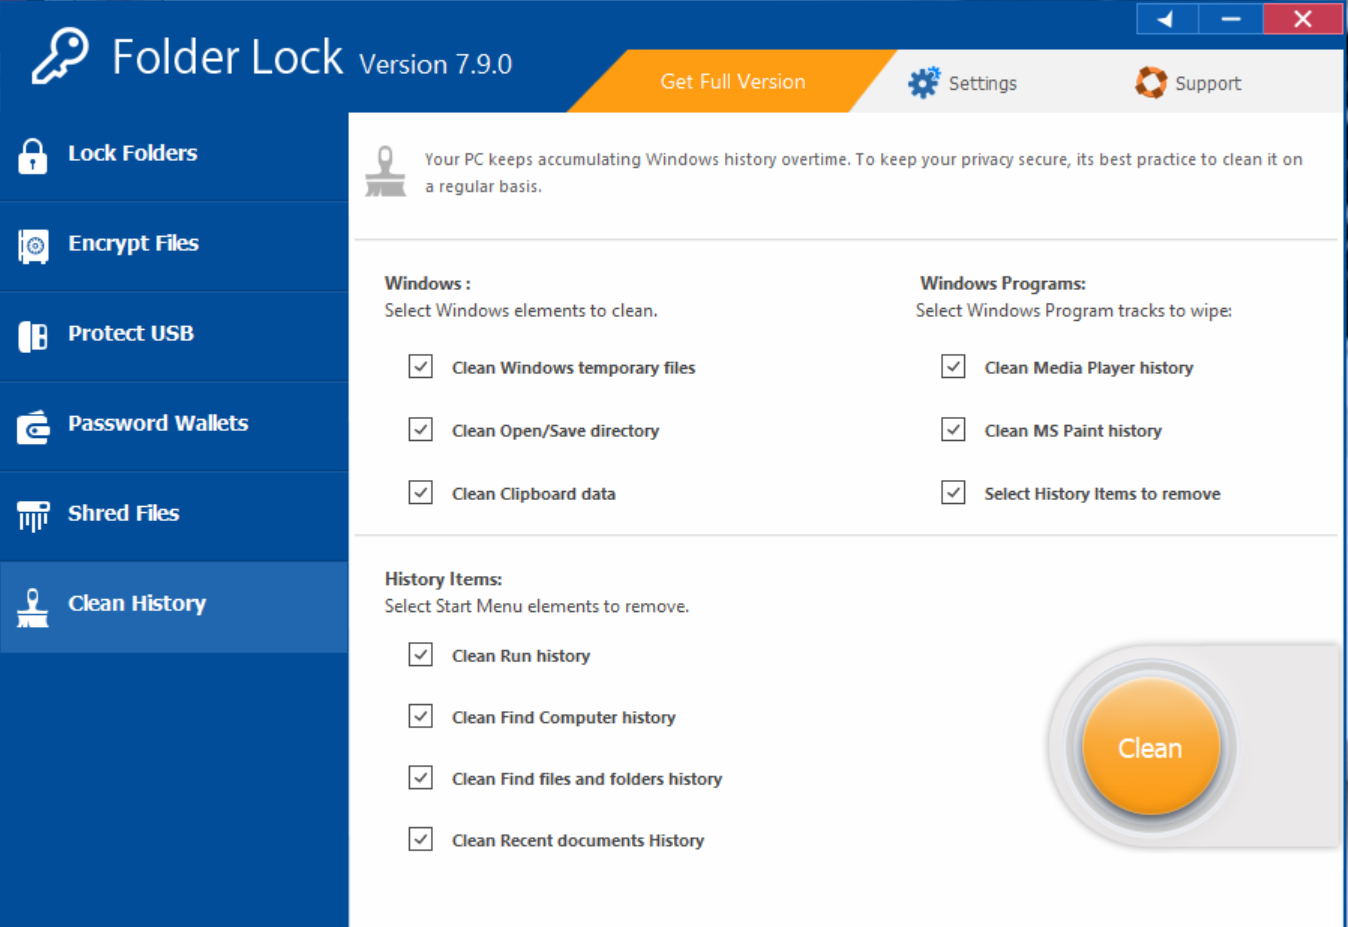 A screenshot of Folder Lock software with its user-friendly interface